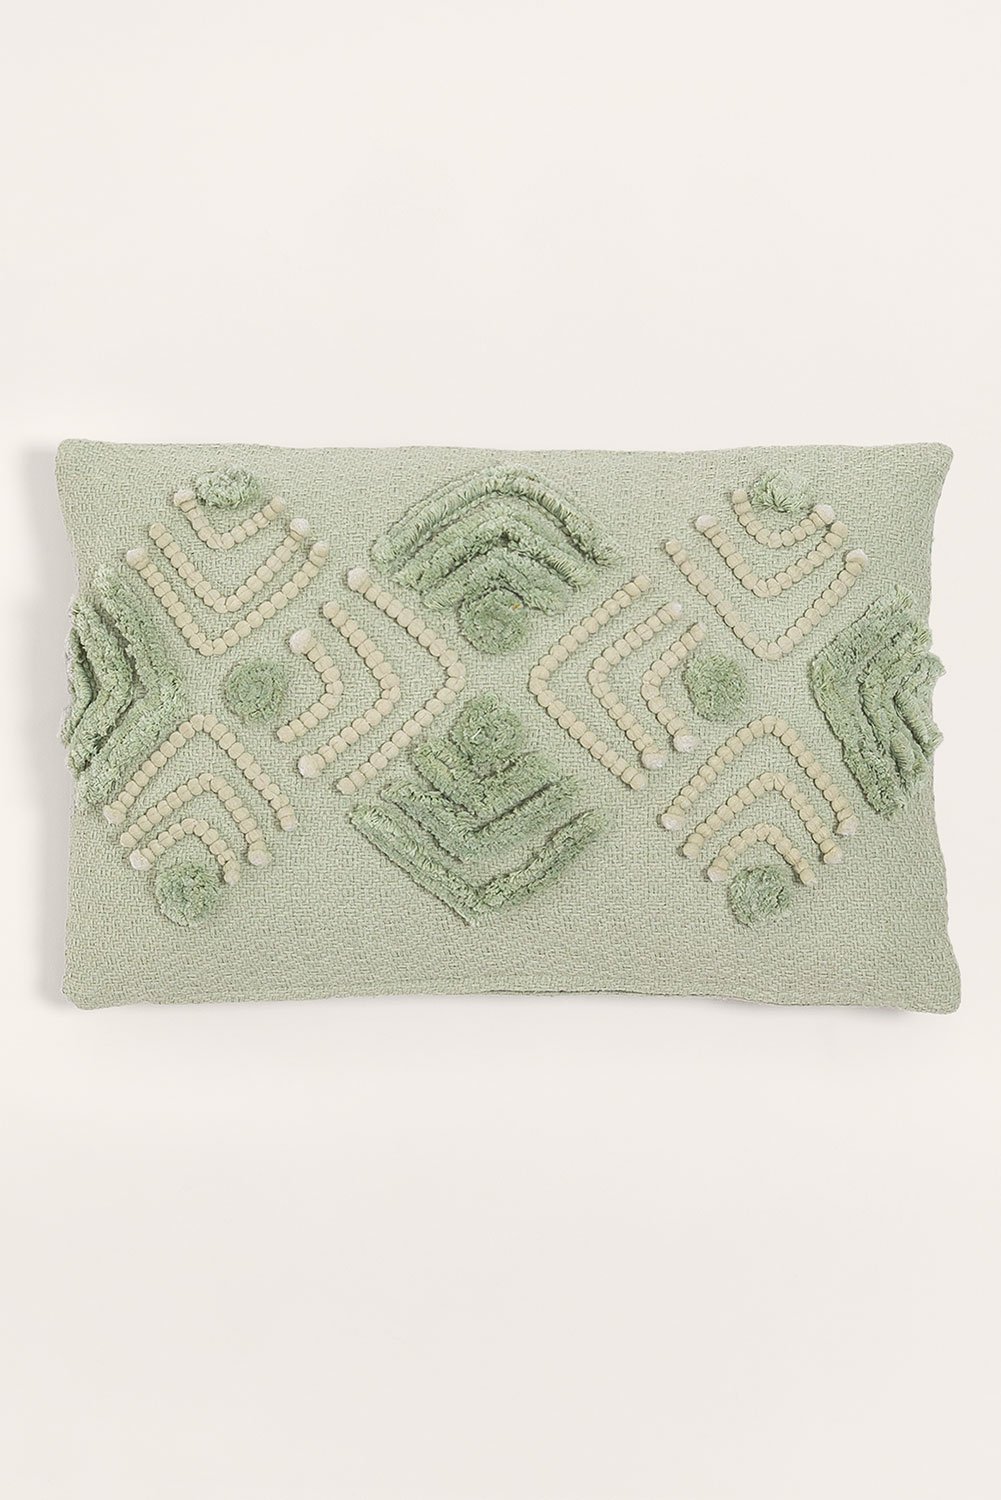 Embroidered Cotton Cushion (30 x 45 cm) Efra, gallery image 1